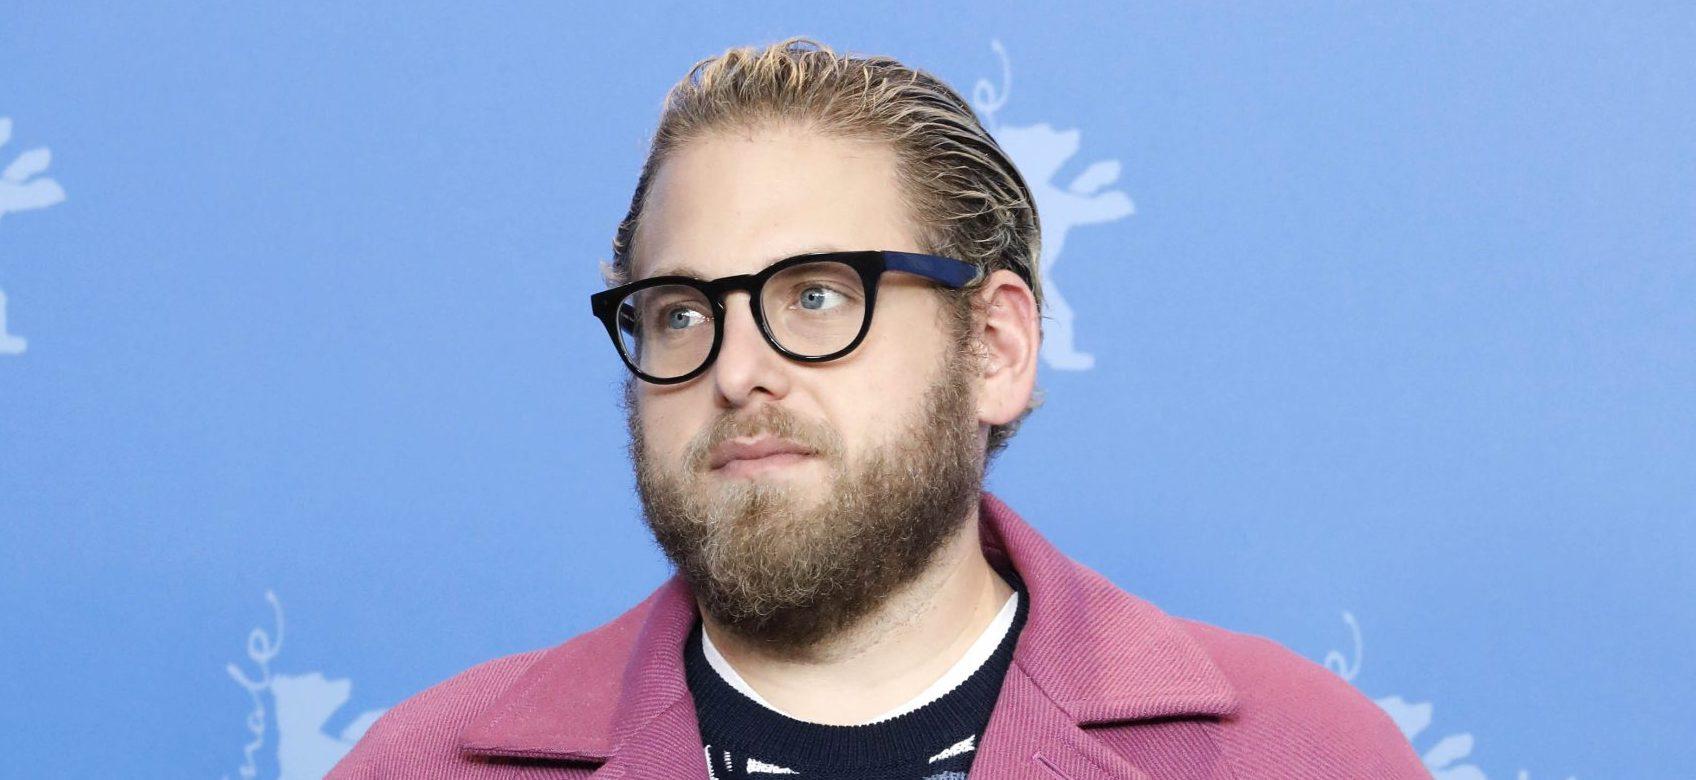 Jonah Hill at the Photocall 'Mid90s', Berlinale 2019